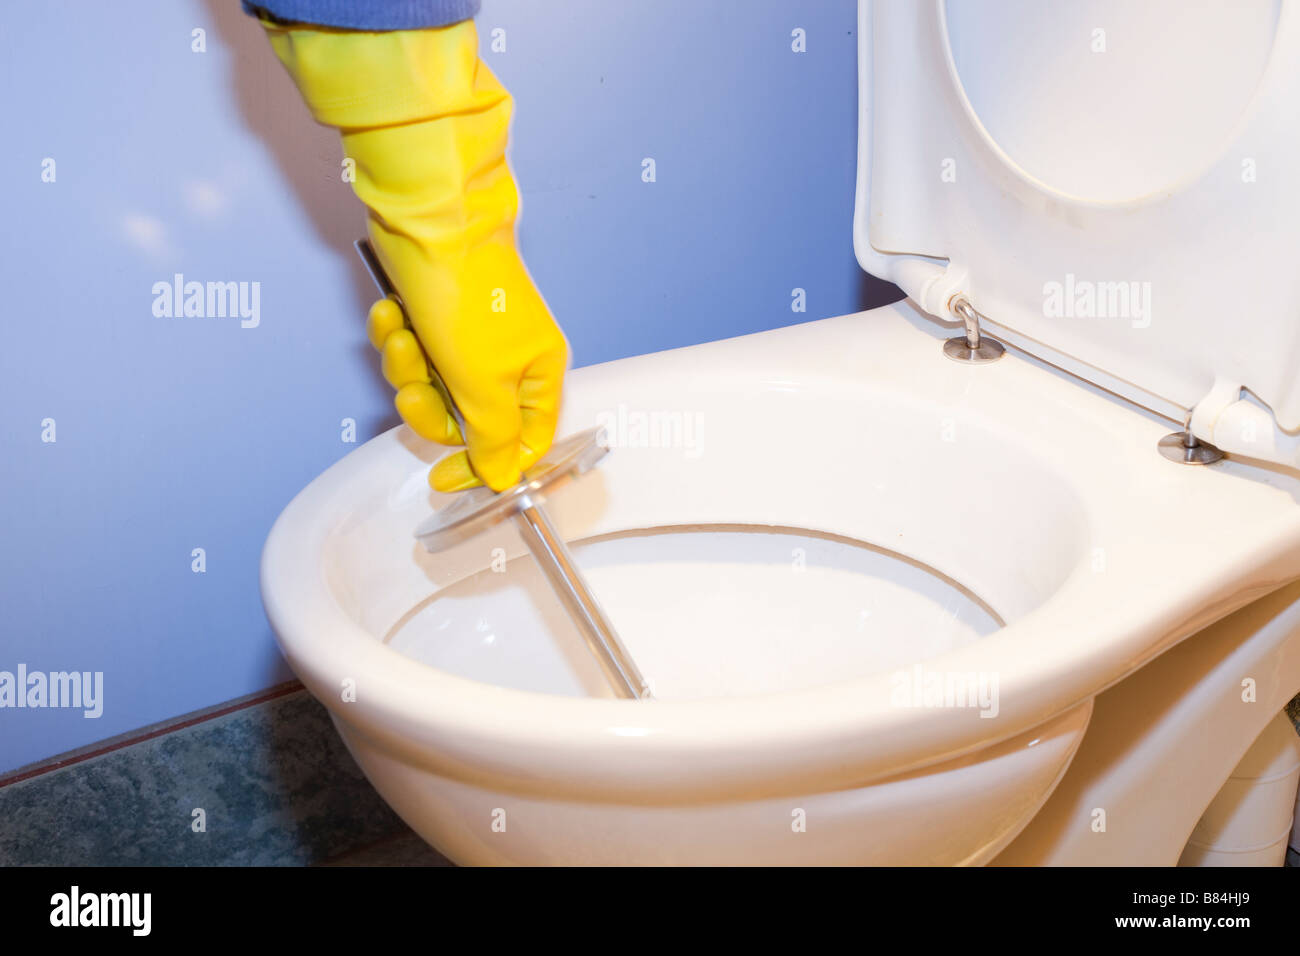 Cleaning a household domestic toilet with a toilet cleaning brush Stock Photo